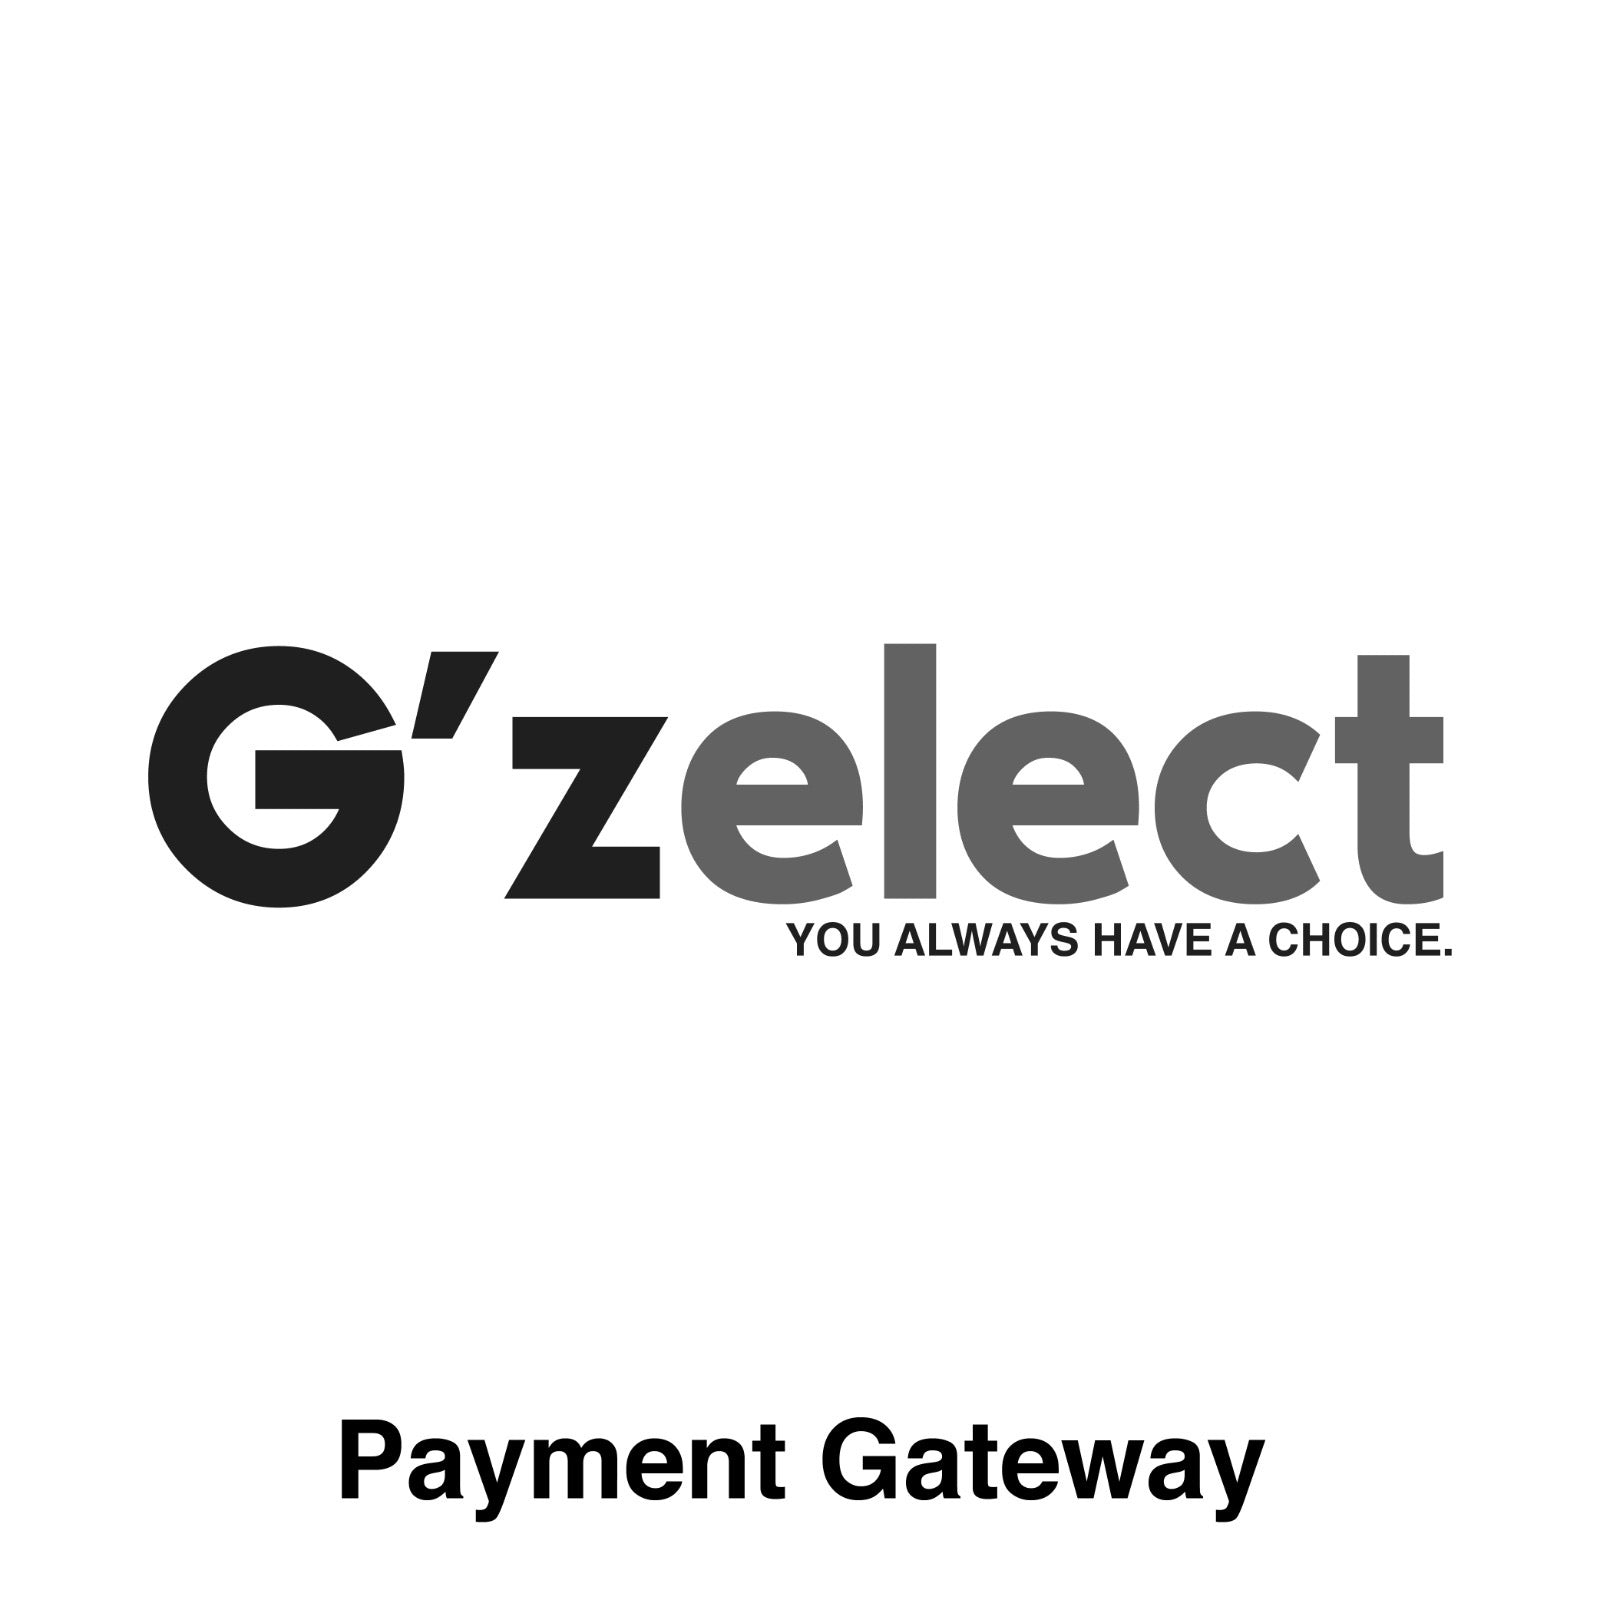 G’zelect payment